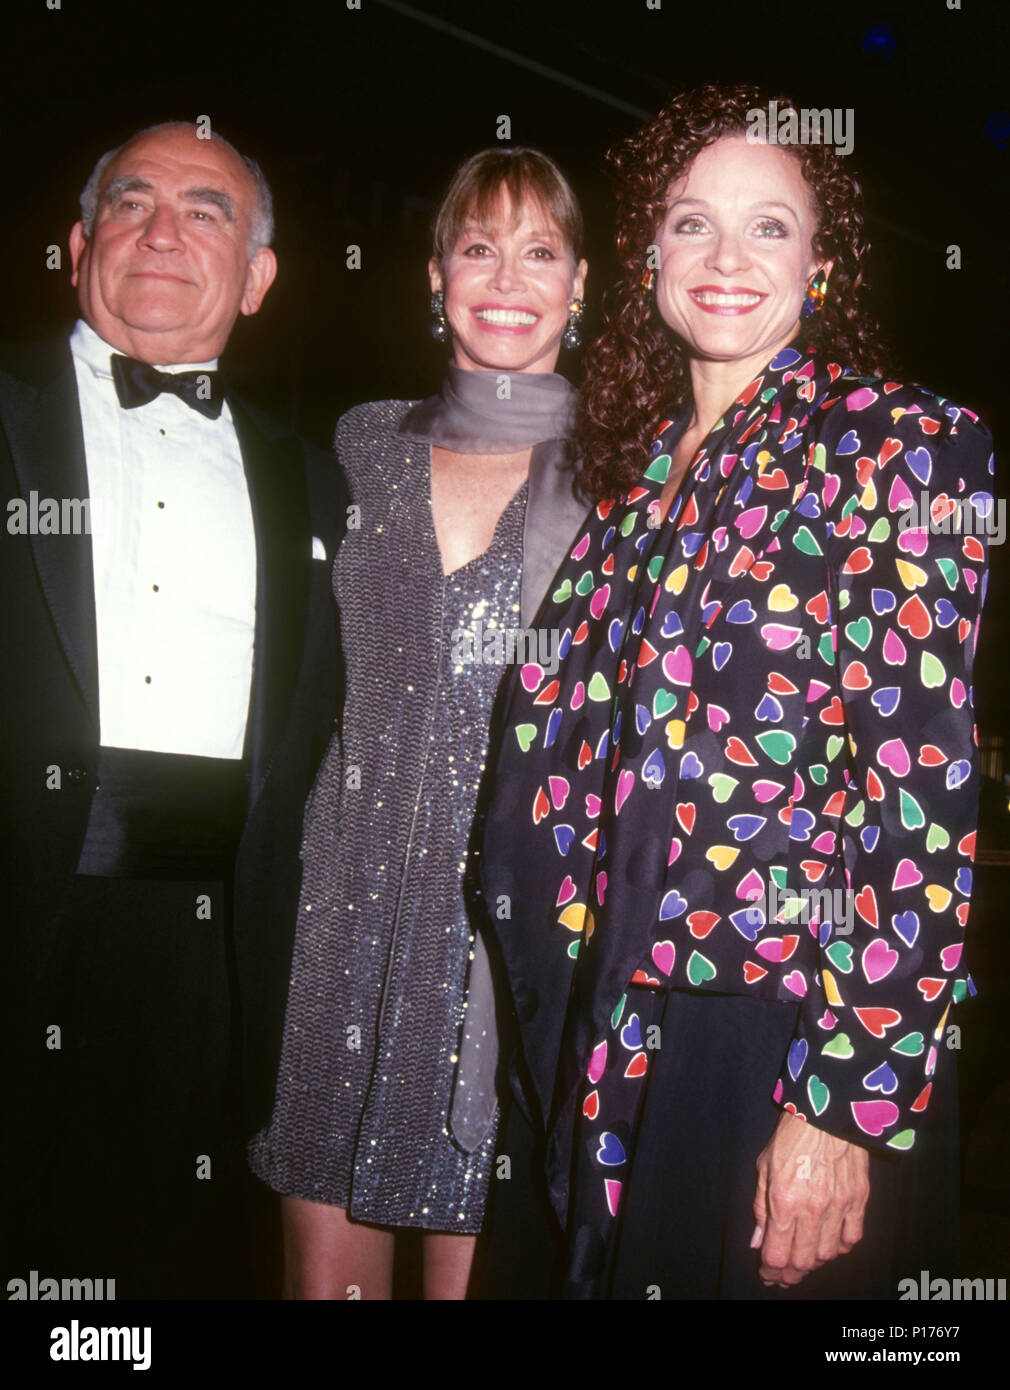 BEVERLY HILLS, CA - OCTOBER 04: (L-R) Actor Ed Asner, actress/honoree Mary Tyler Moore and actress Valerie Harper attend the Los Angeles Chapter Juvenile Diabetes Research Foundation International Presents the First Annual Promise Ball on October 4, 1991 at the Beverly Hilton Hotel in Beverly Hills, California. Photo by Barry King/Alamy Stock Photo Stock Photo